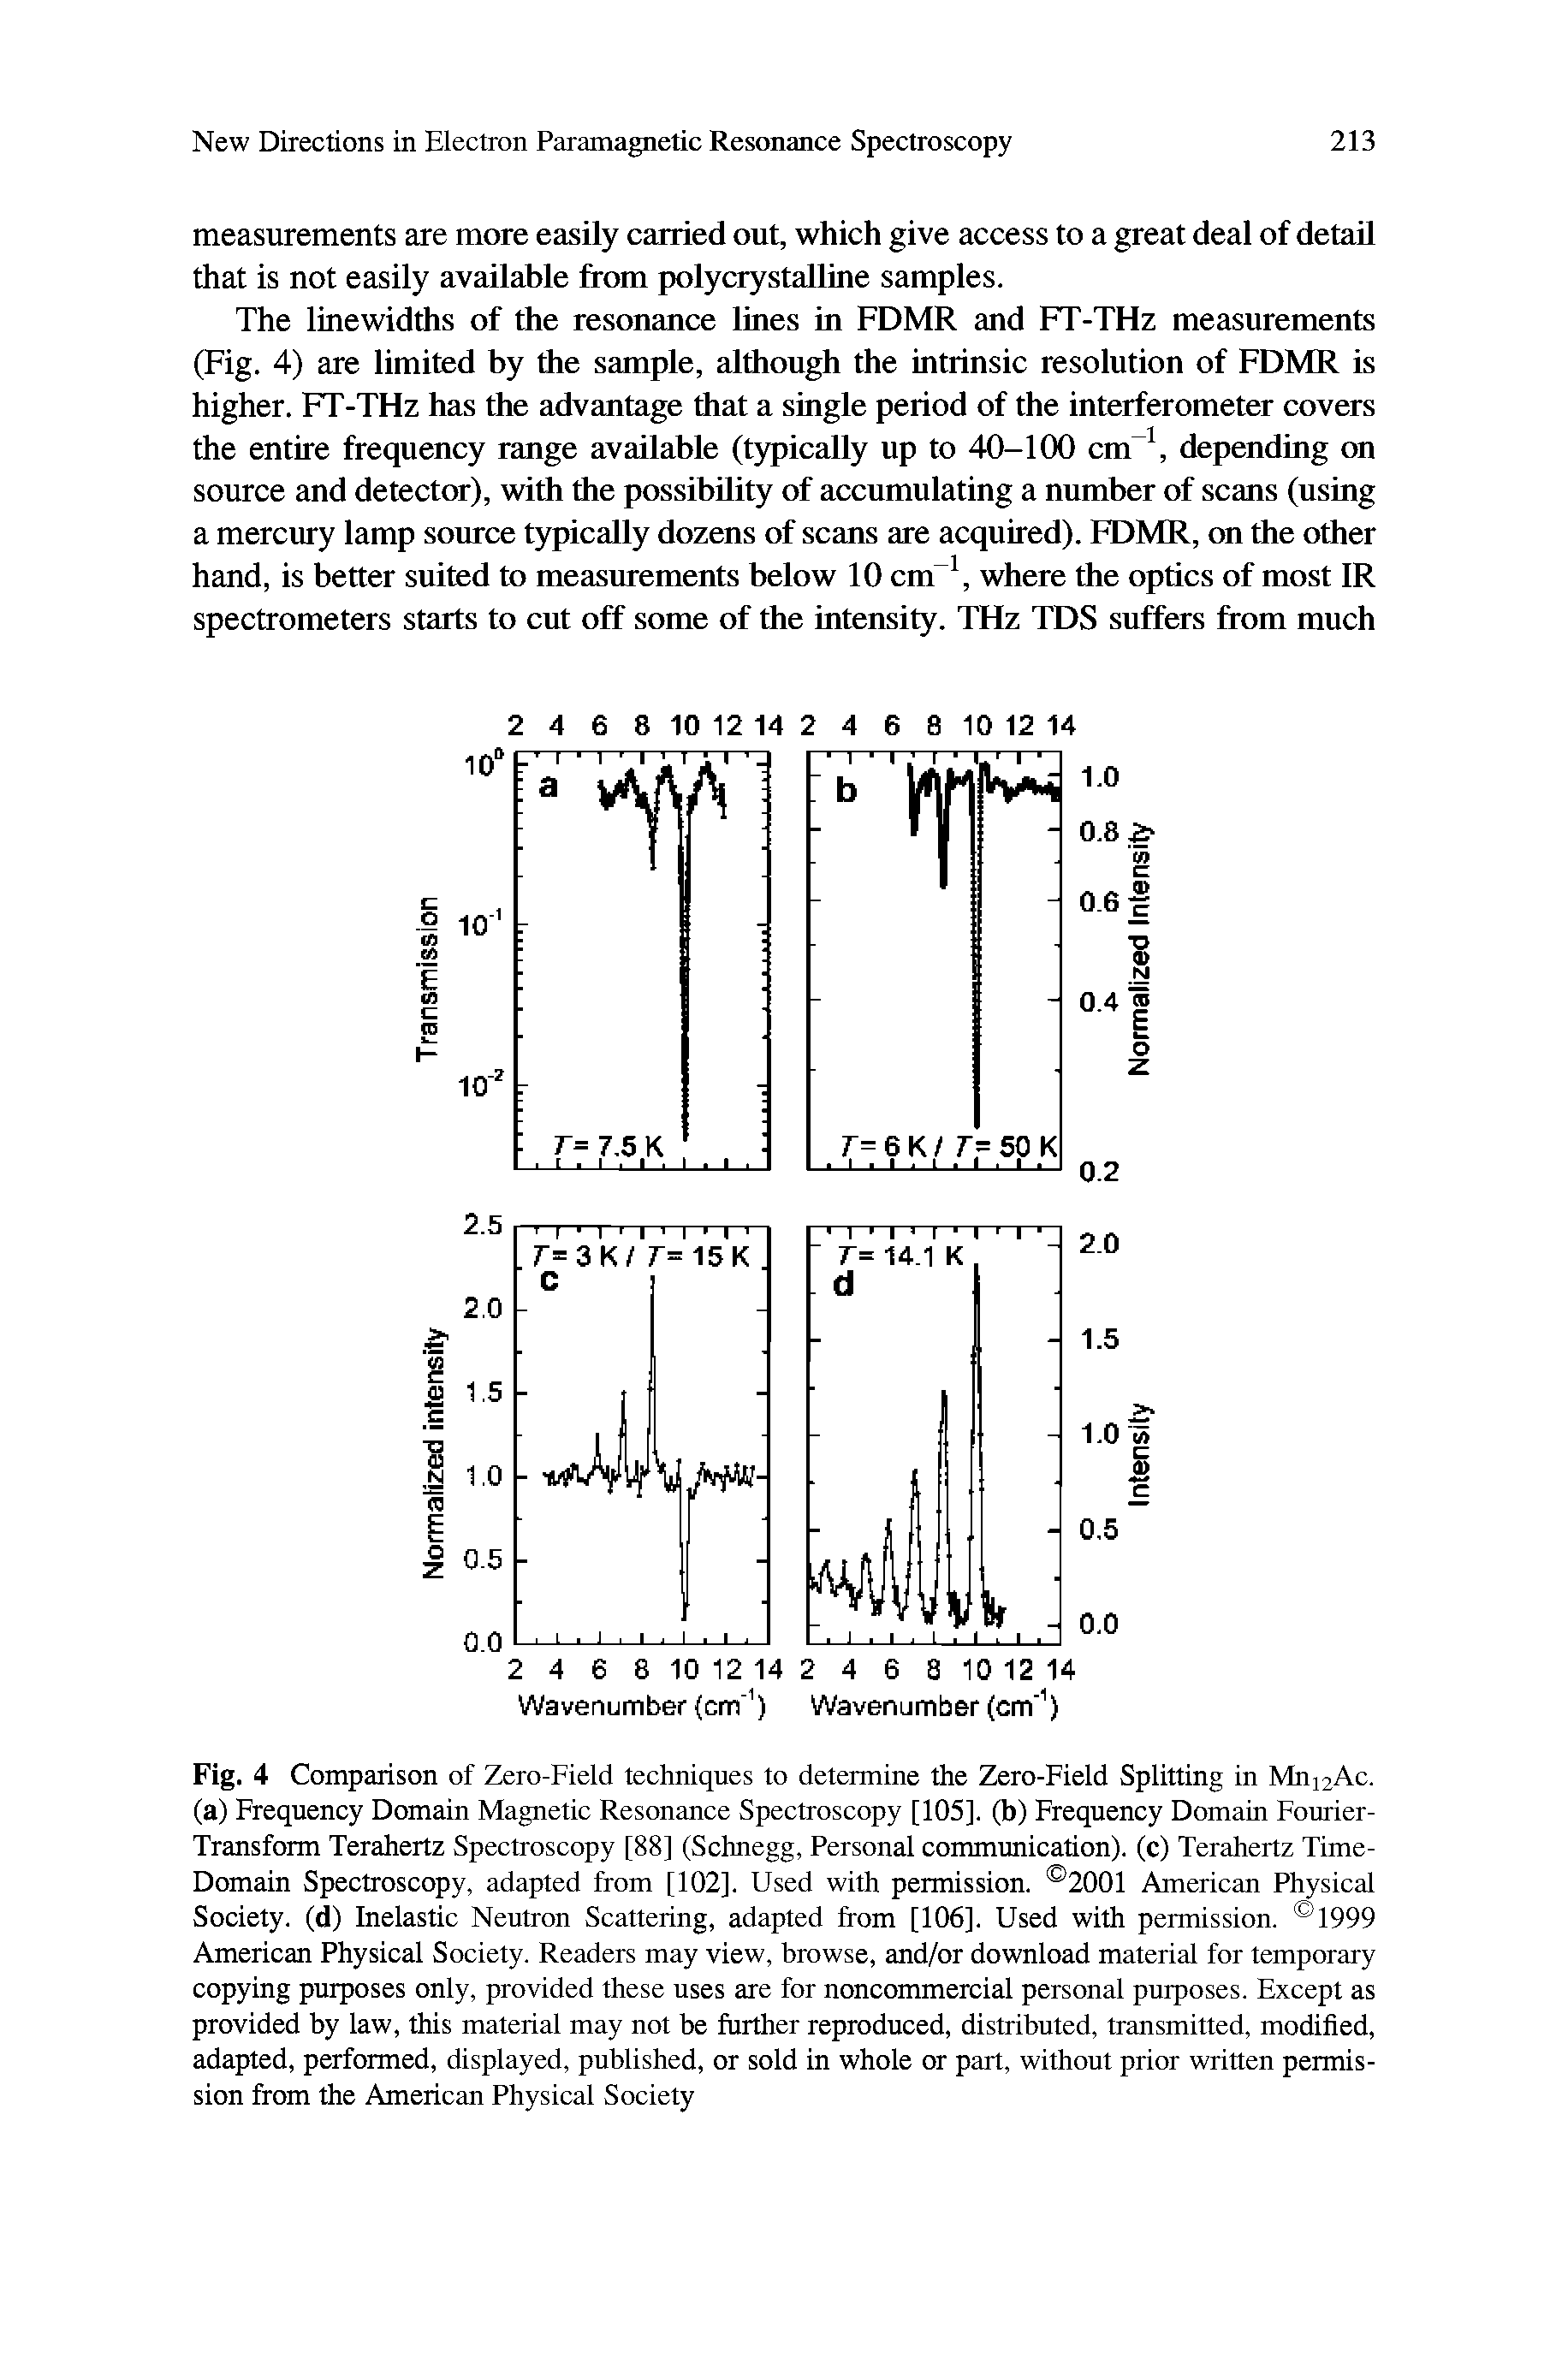 Fig. 4 Comparison of Zero-Field techniques to determine the Zero-Field Splitting in Mni2Ac. (a) Frequency Domain Magnetic Resonance Spectroscopy [105]. (b) Frequency Domain Fourier-Transform Terahertz Spectroscopy [88] (Schnegg, Personal communication), (c) Terahertz Time-Domain Spectroscopy, adapted from [102]. Used with permission. 2001 American Physical Society, (d) Inelastic Neutron Scattering, adapted from [106]. Used with permission. 1999 American Physical Society. Readers may view, browse, and/or download material for temporary copying purposes only, provided these uses are for noncommercial personal purposes. Except as provided by law, this material may not be further reproduced, distributed, transmitted, modified, adapted, performed, displayed, published, or sold in whole or part, without prior written permission from the American Physical Society...